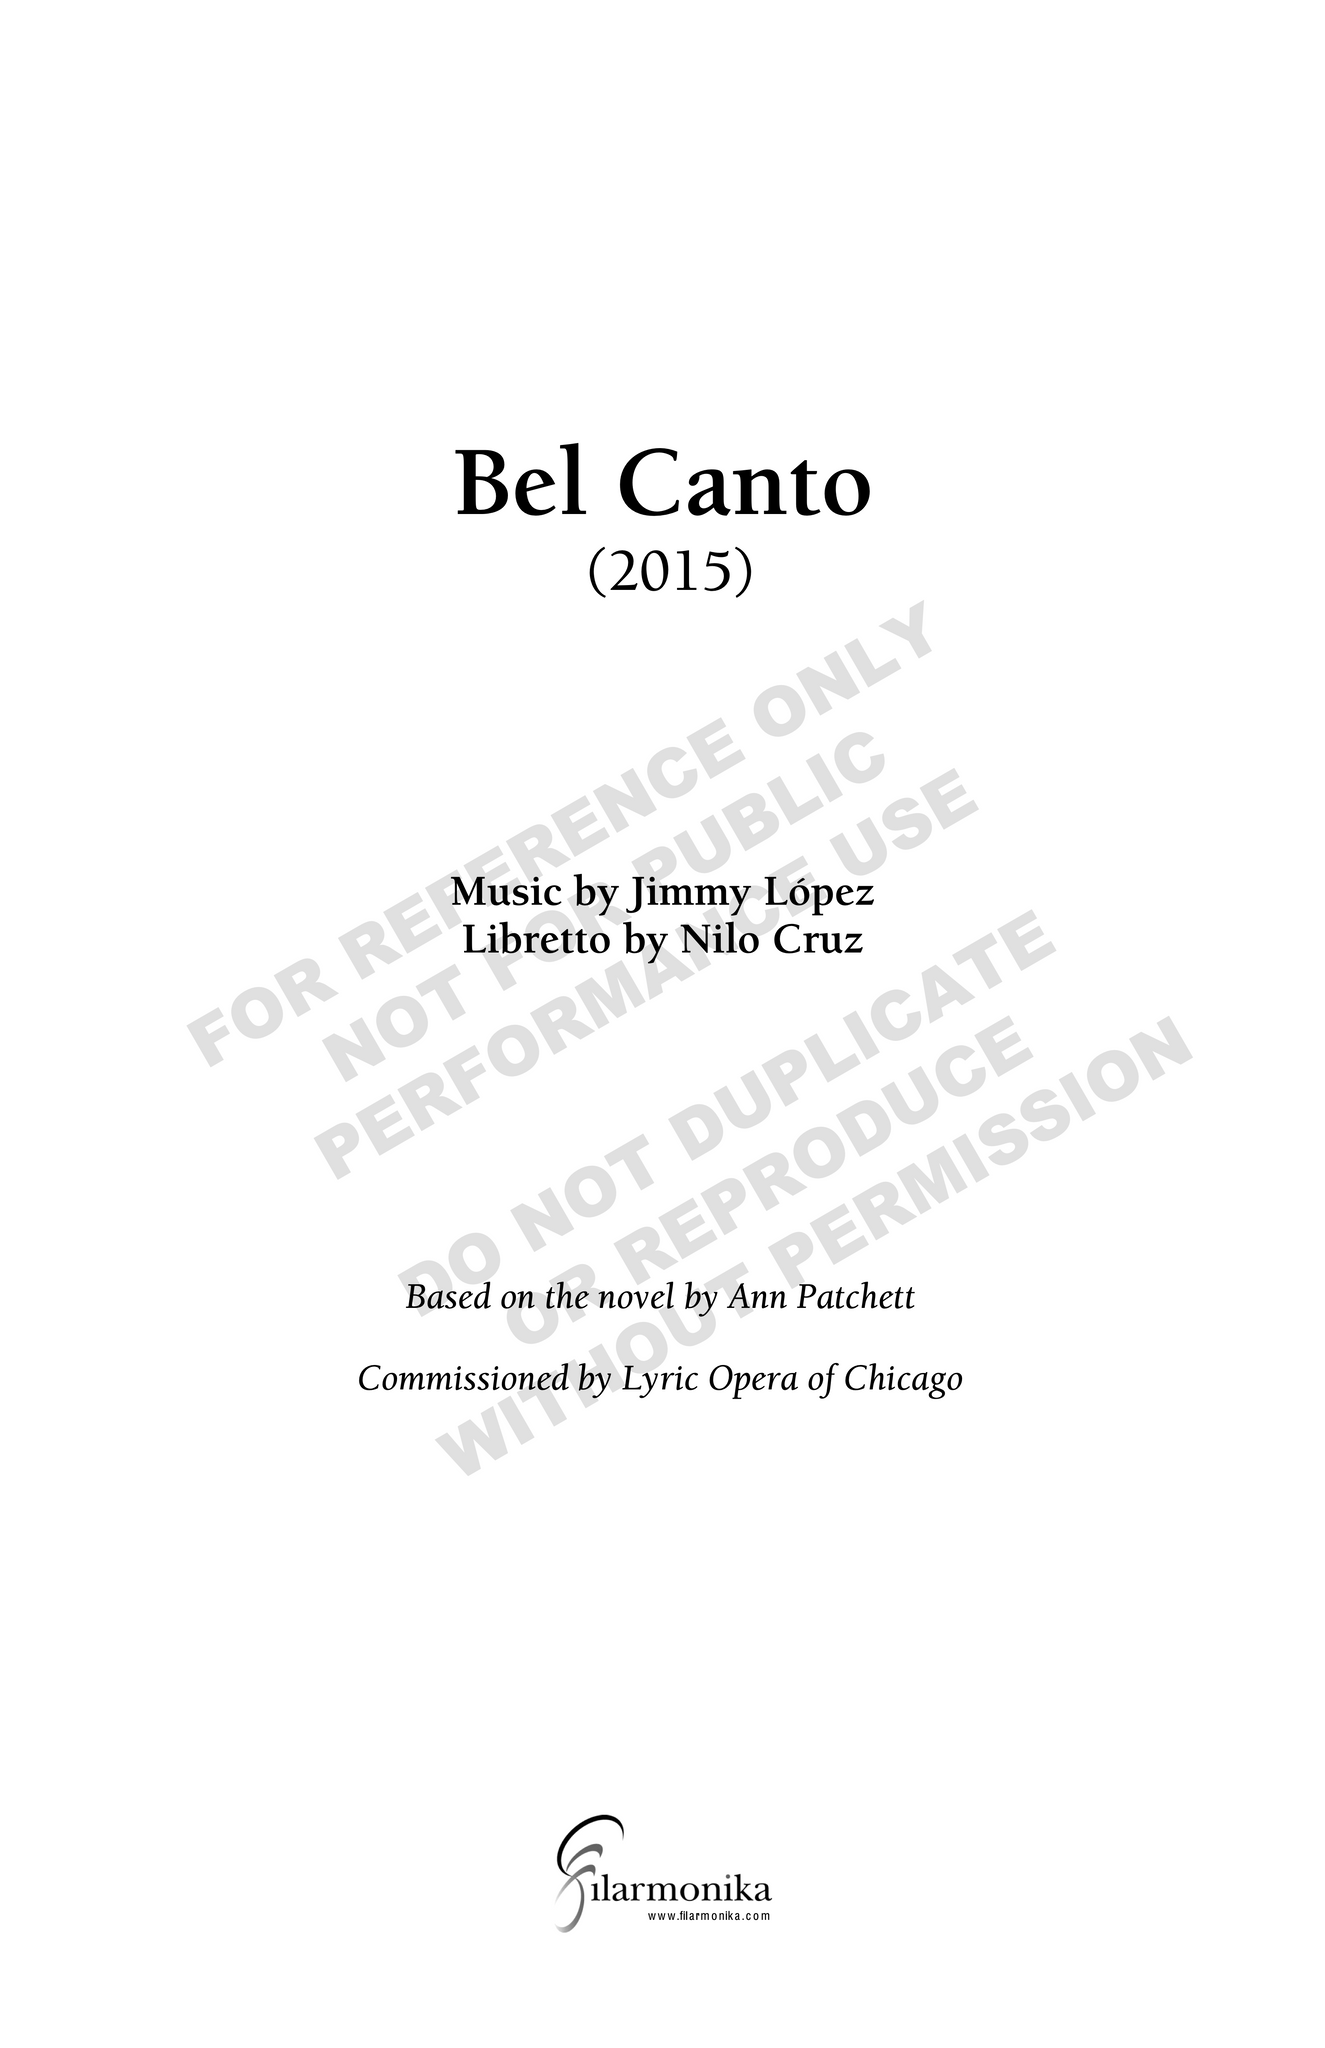 Bel Canto: An Opera in Two Acts